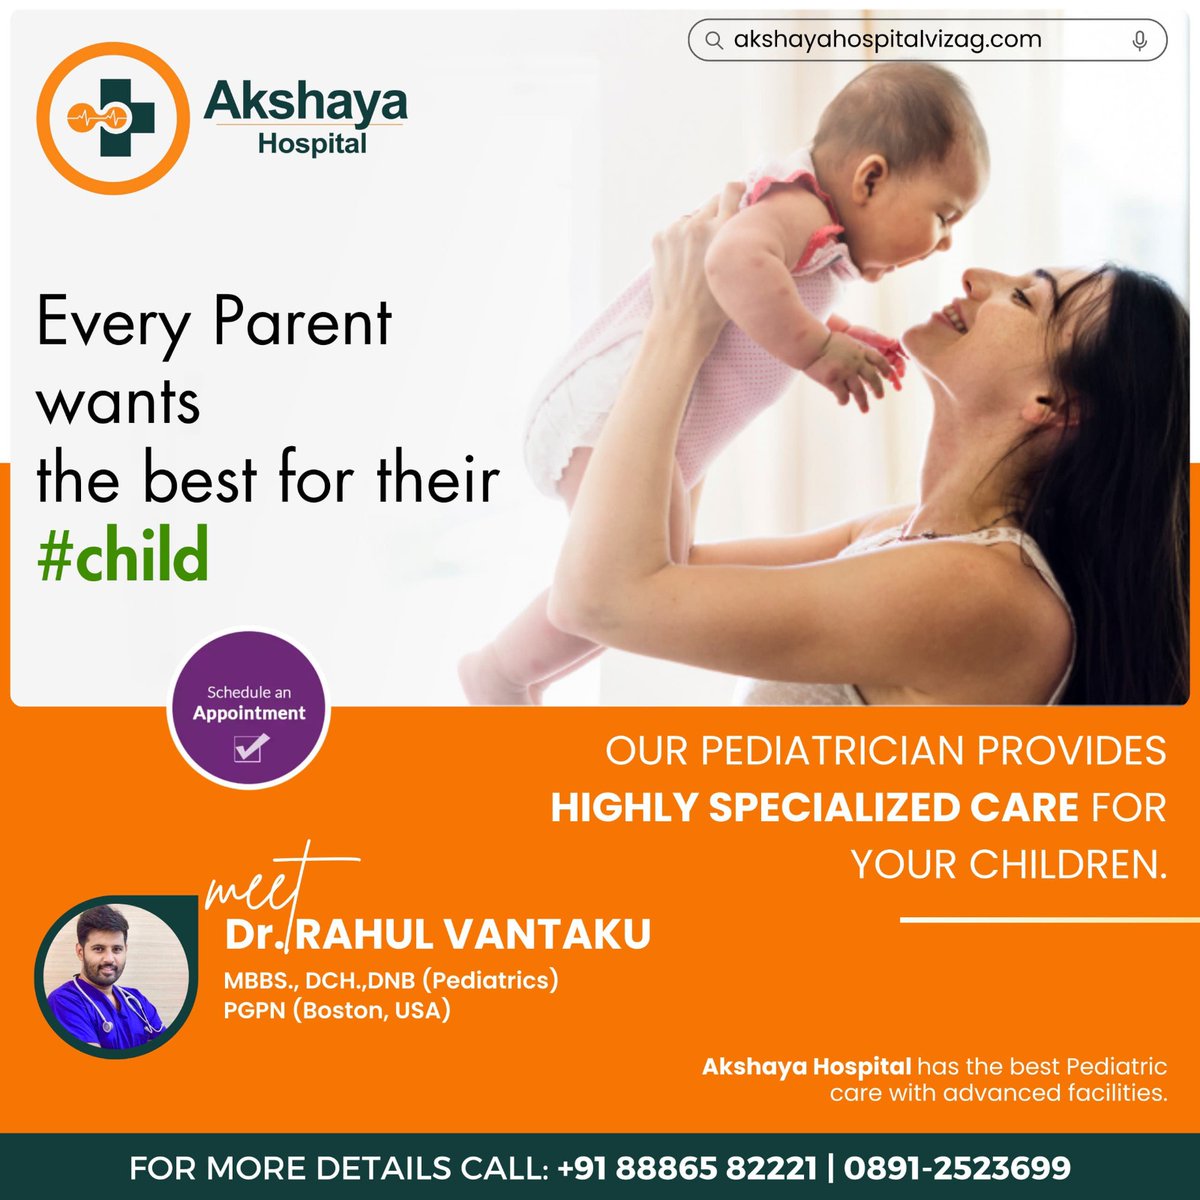 Trust us to provide a safe, comforting environment where children receive the personalized attention they need to thrive.

Consult Now : +91 88865 82221 | 0891-2523699

#AkshayaHospital #BestPediatricCare #ChildHealth #ChildrensHospitalVizag #ExpertPediatrics #BestPediatricians